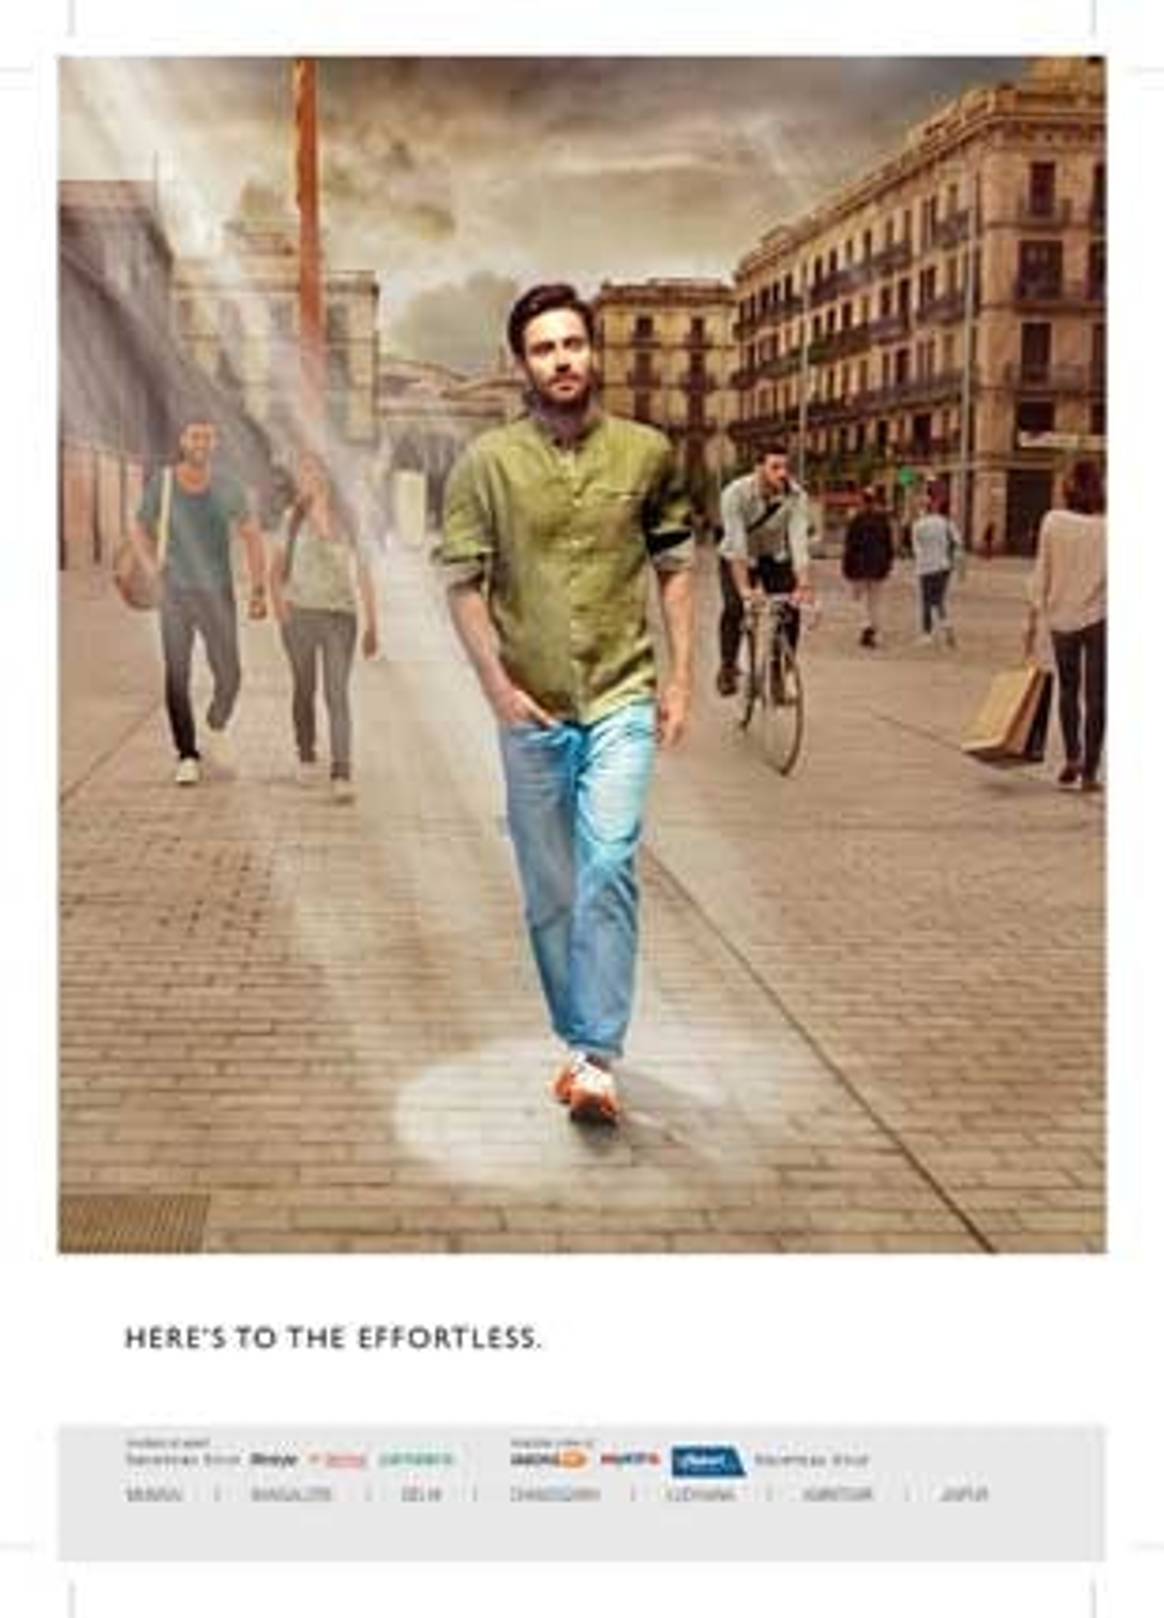 Celio continues India focus, targets opening 100 stores by ’16